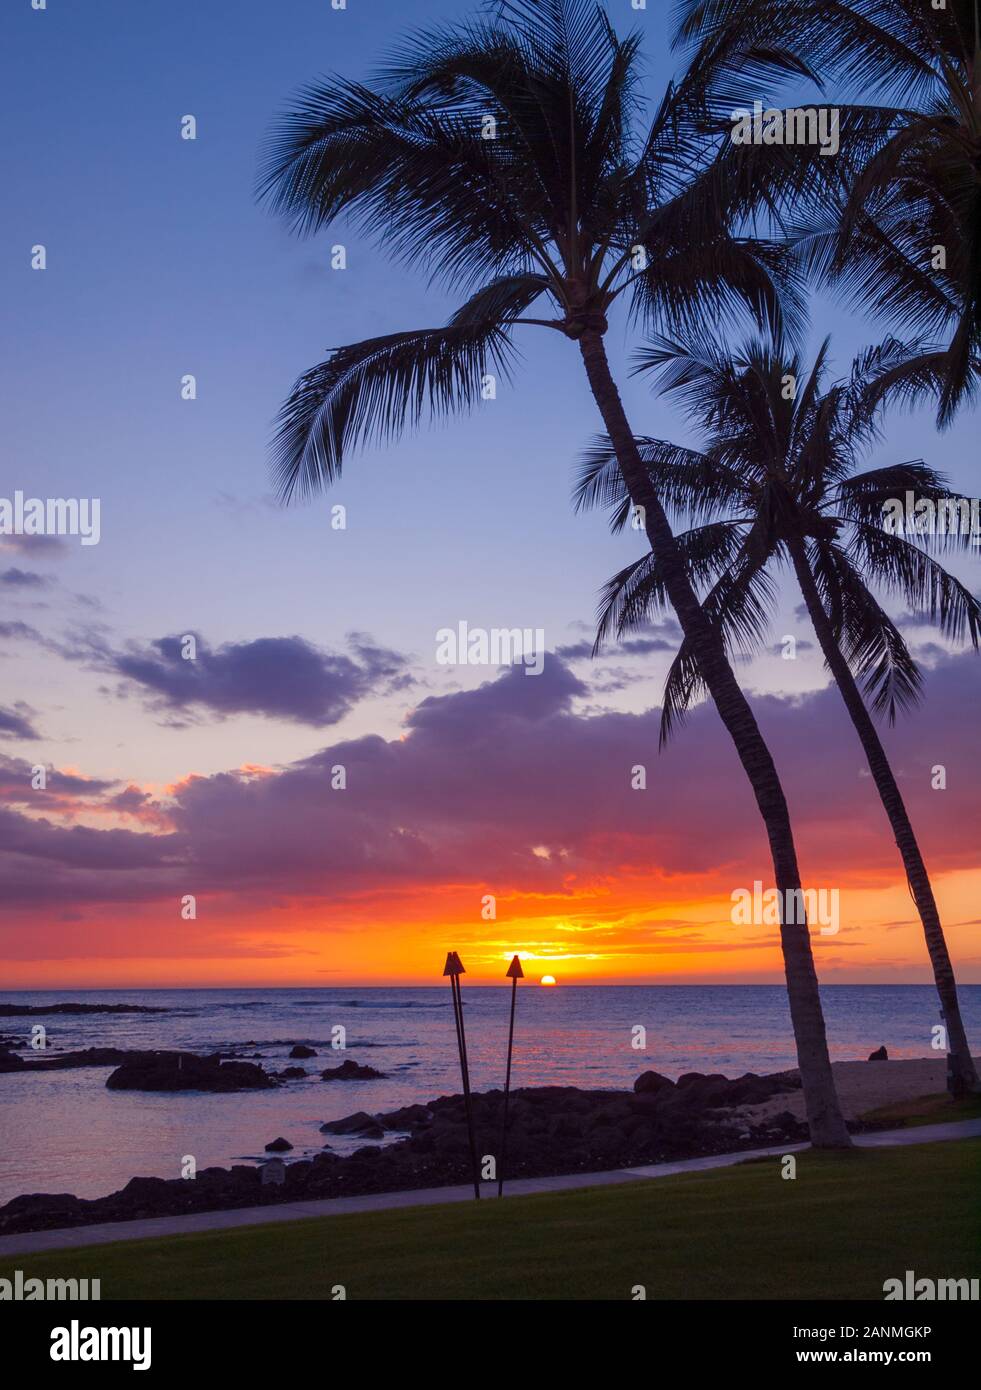 A beautiful sunset and silhouetted coconut palm trees as seen from Pauoa Bay at the Fairmont Orchid, Kohala Coast, Hawaii. Stock Photo